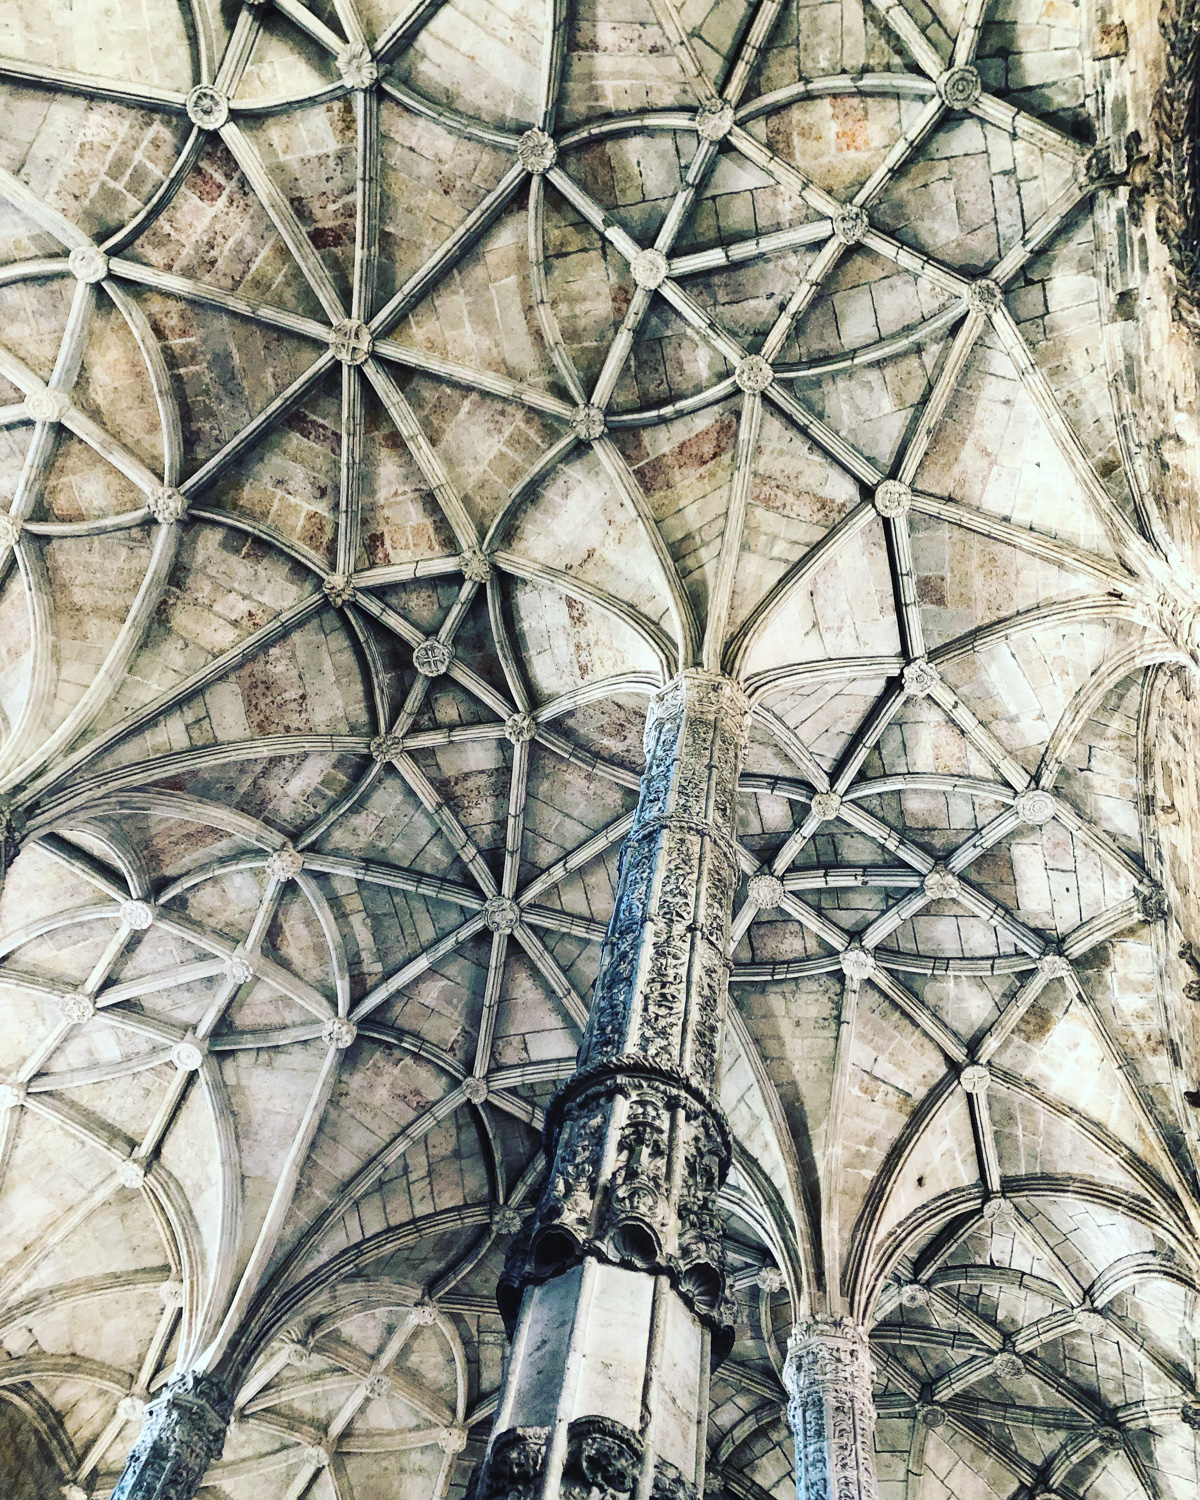 The roof of the San Jeronimos Monastery, Lisbon (Eat Me. Drink Me.)